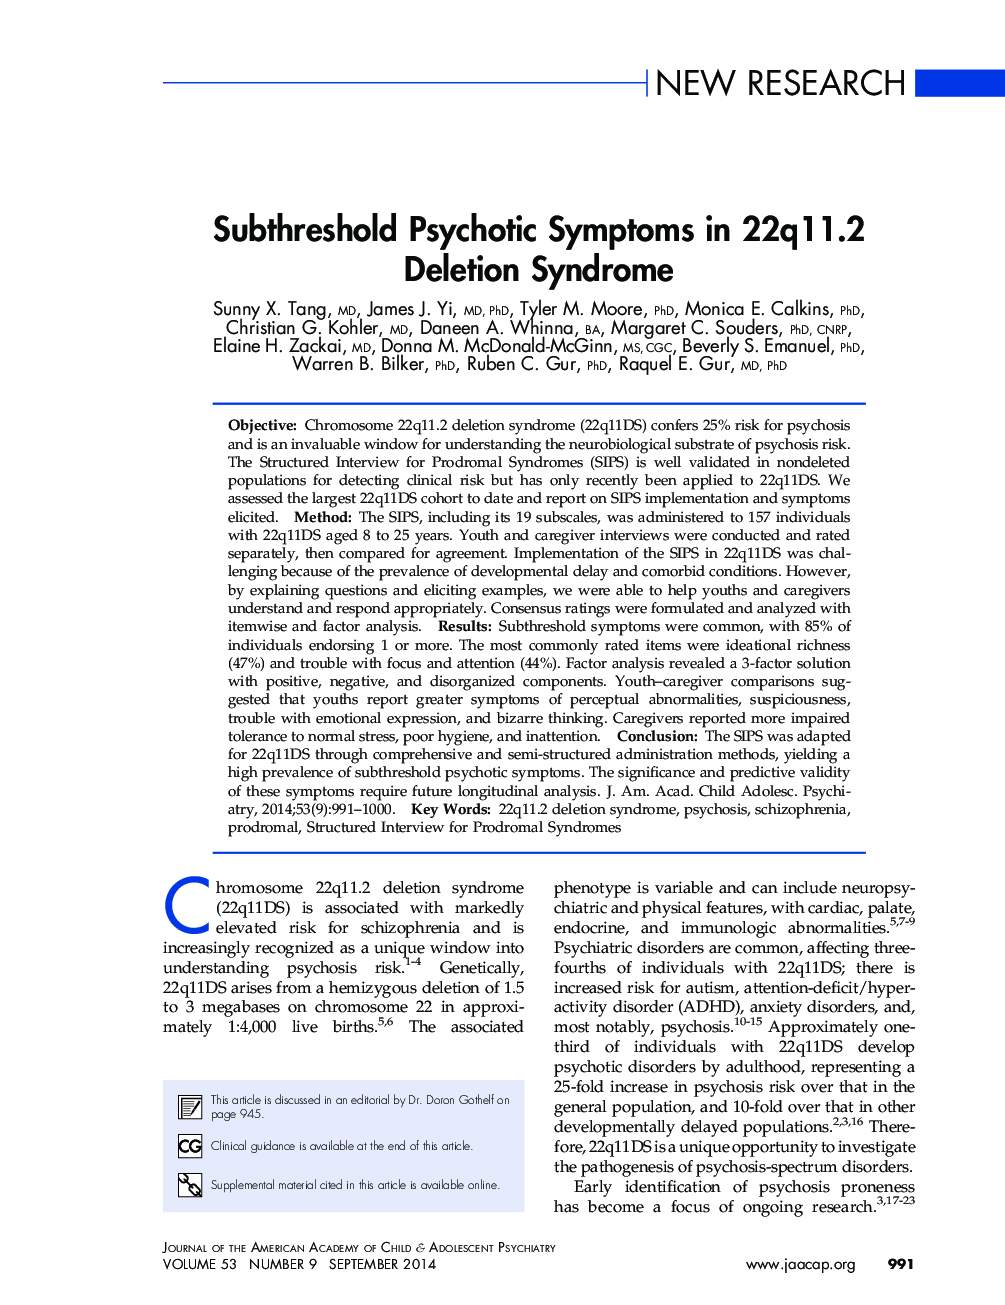 Subthreshold Psychotic Symptoms in 22q11.2 Deletion Syndrome